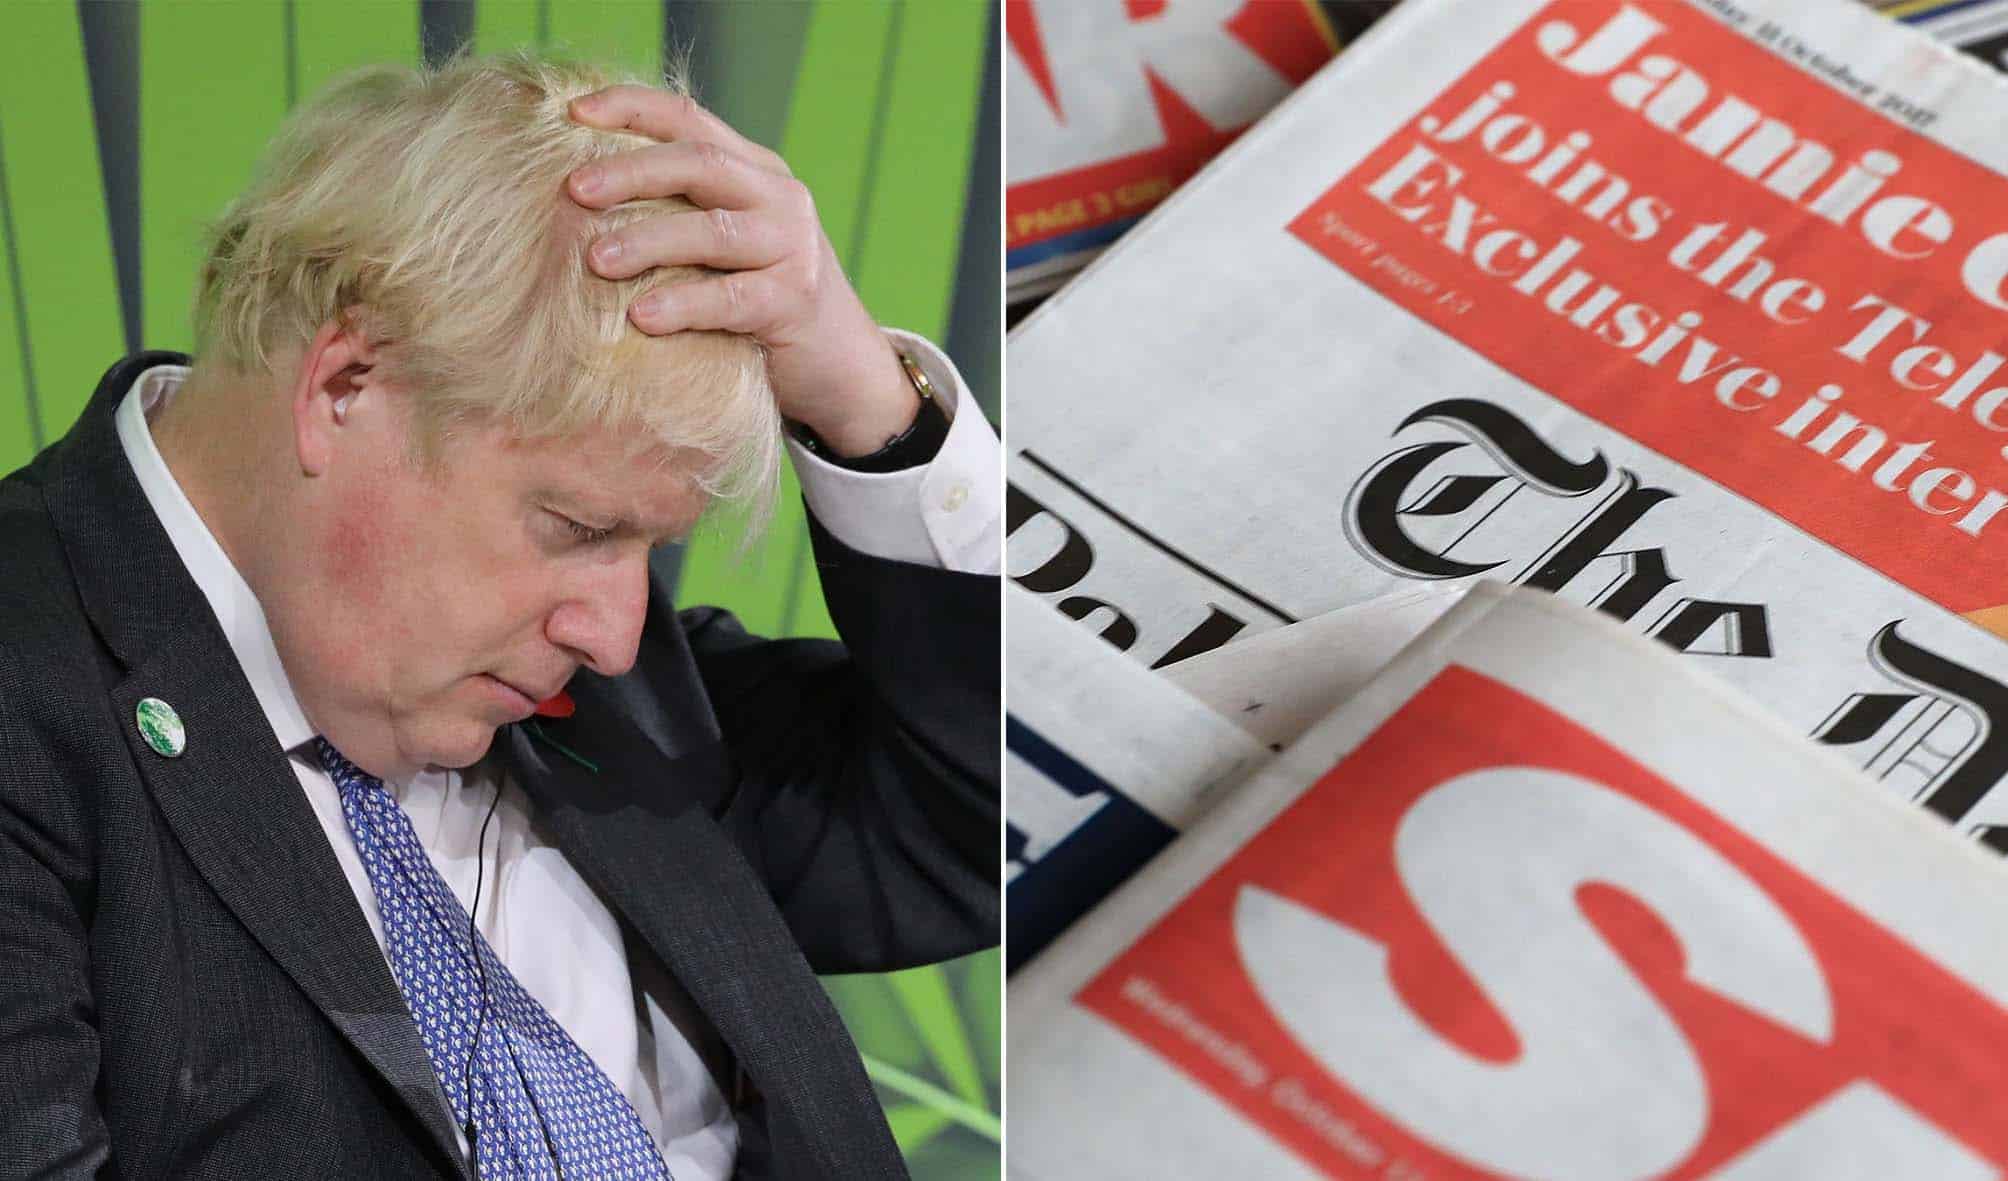 In pics: Even right-wing papers slam PM’s ‘day of chaos’ over U-turn fiasco